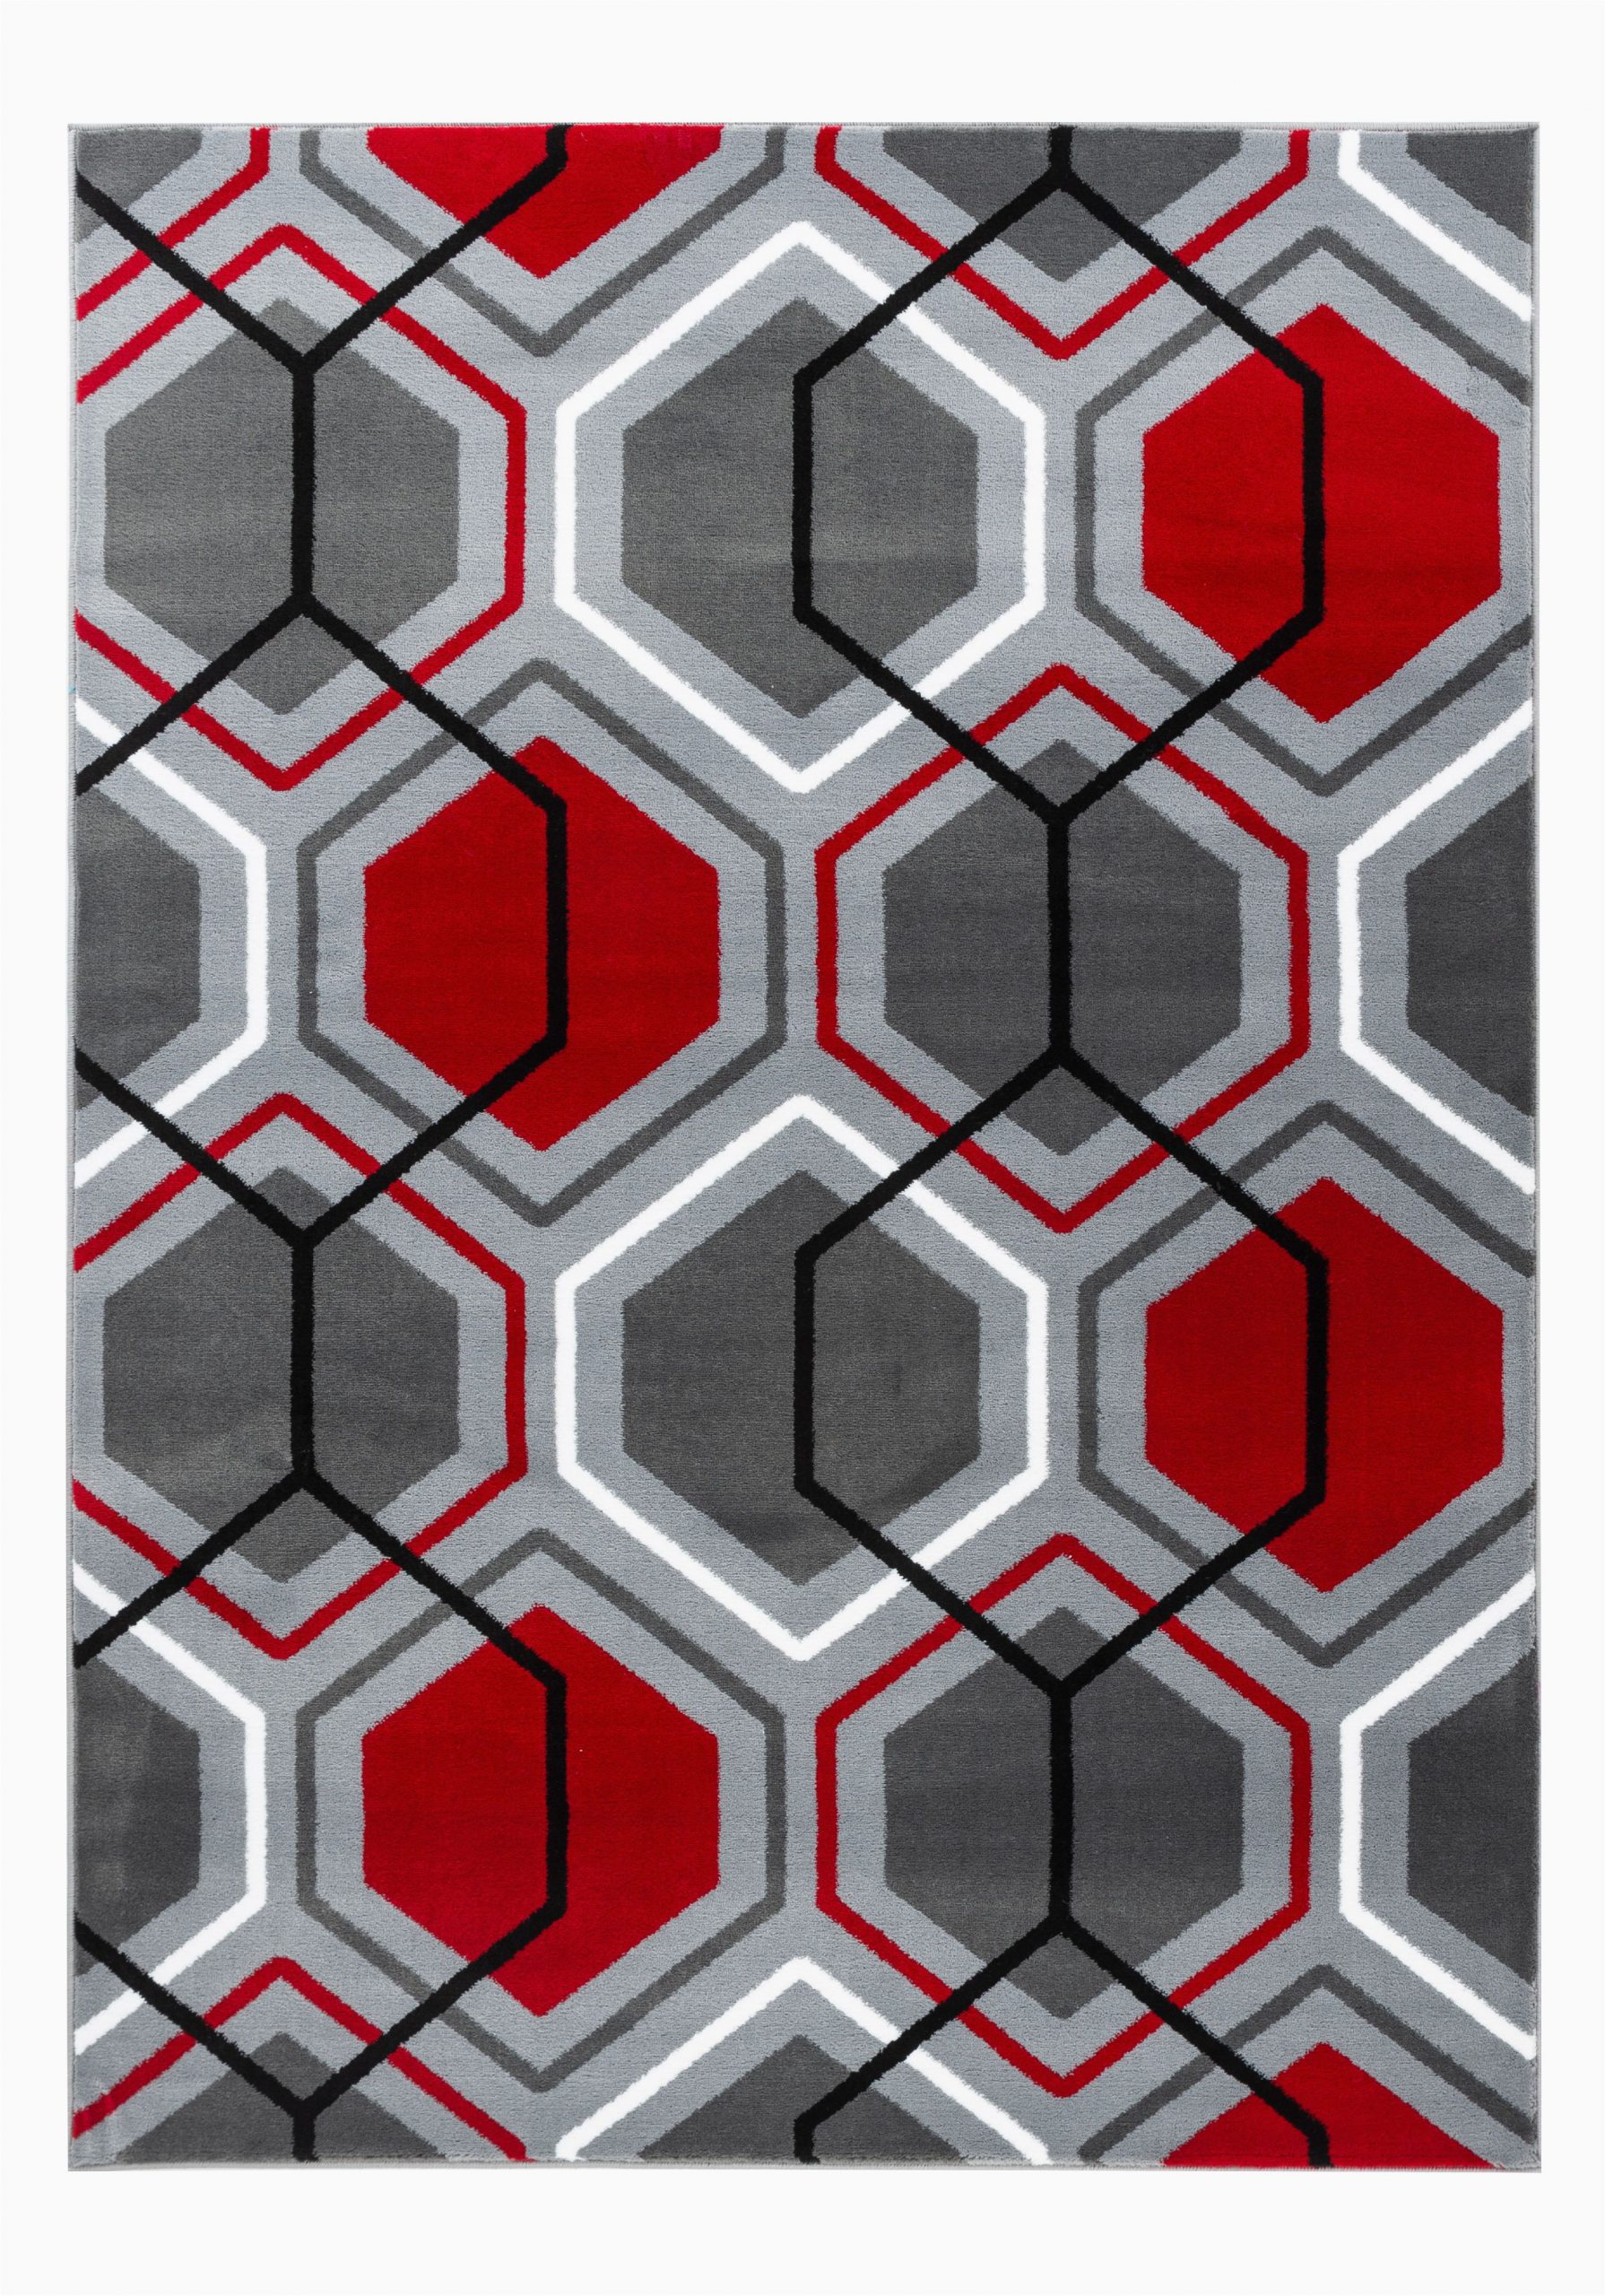 Grey and White area Rug Walmart Summit Collection Geometric Honey B Red Grey Red area Rug Walmart